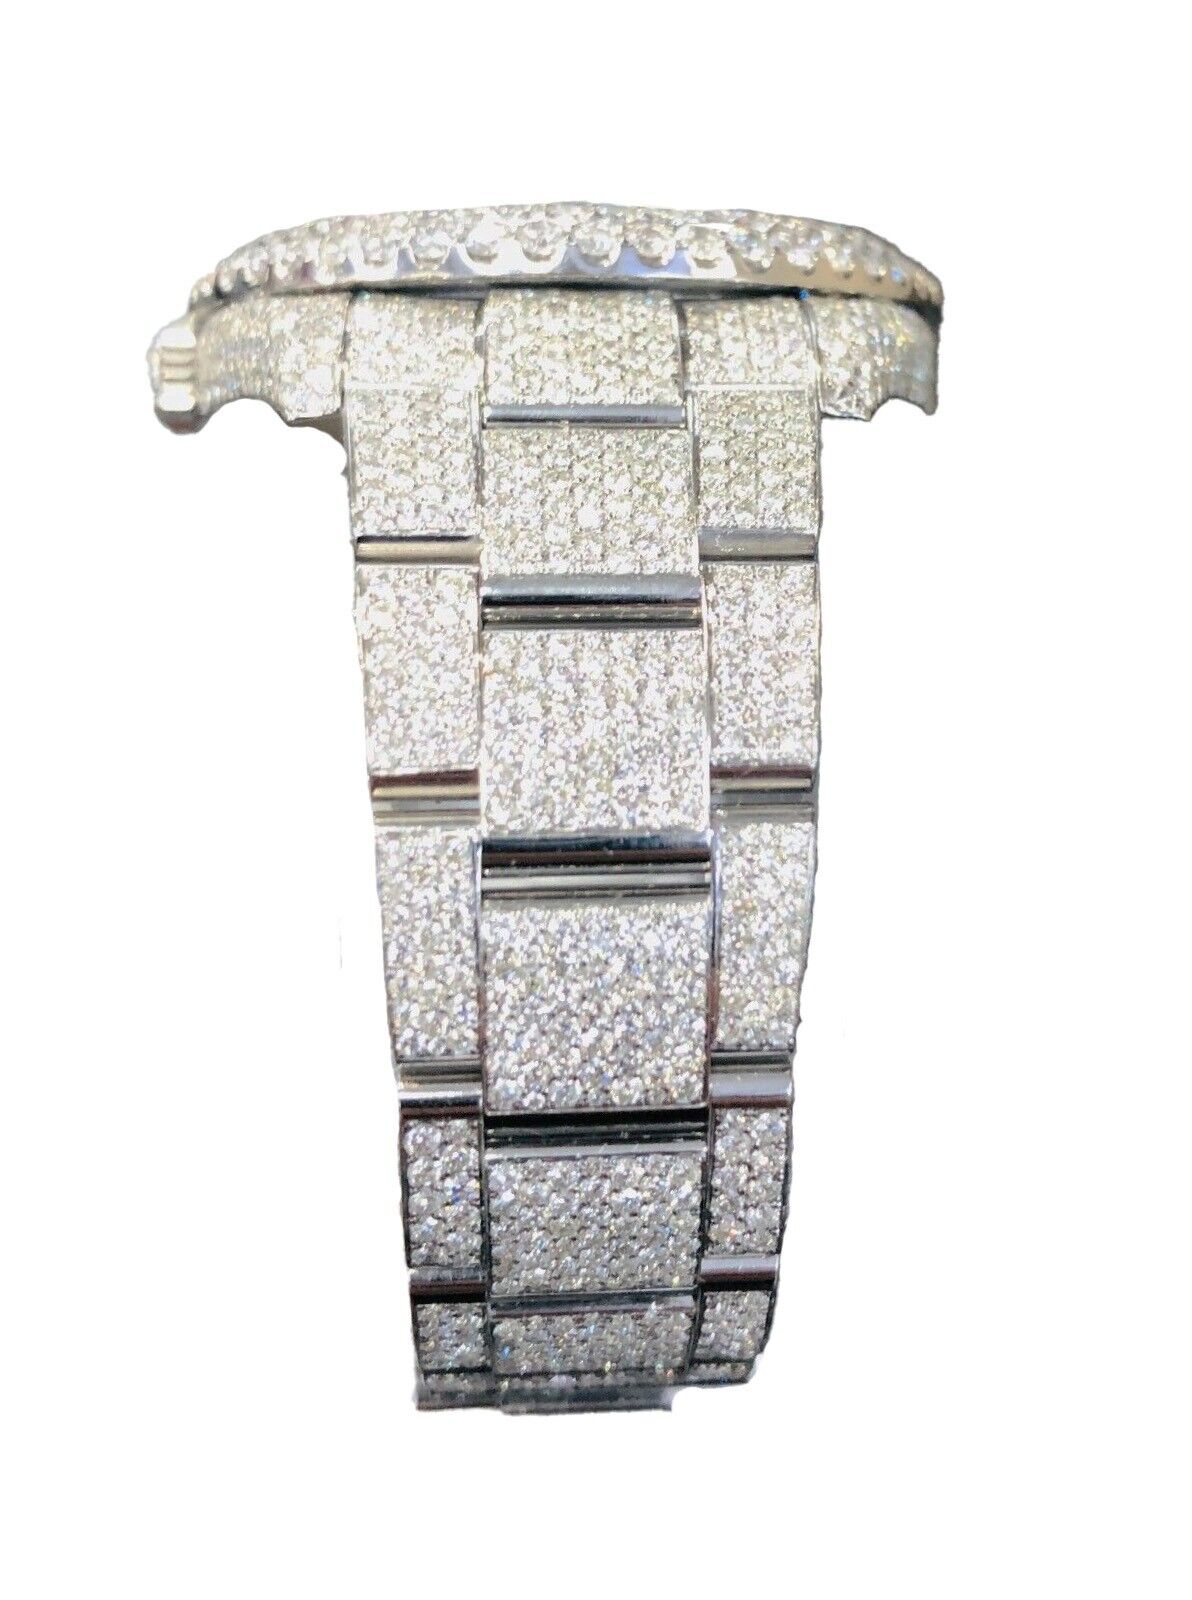 Rolex DateJust 116300 41mm 25 Carat Oyster Diamond Iced Out Men's Watch